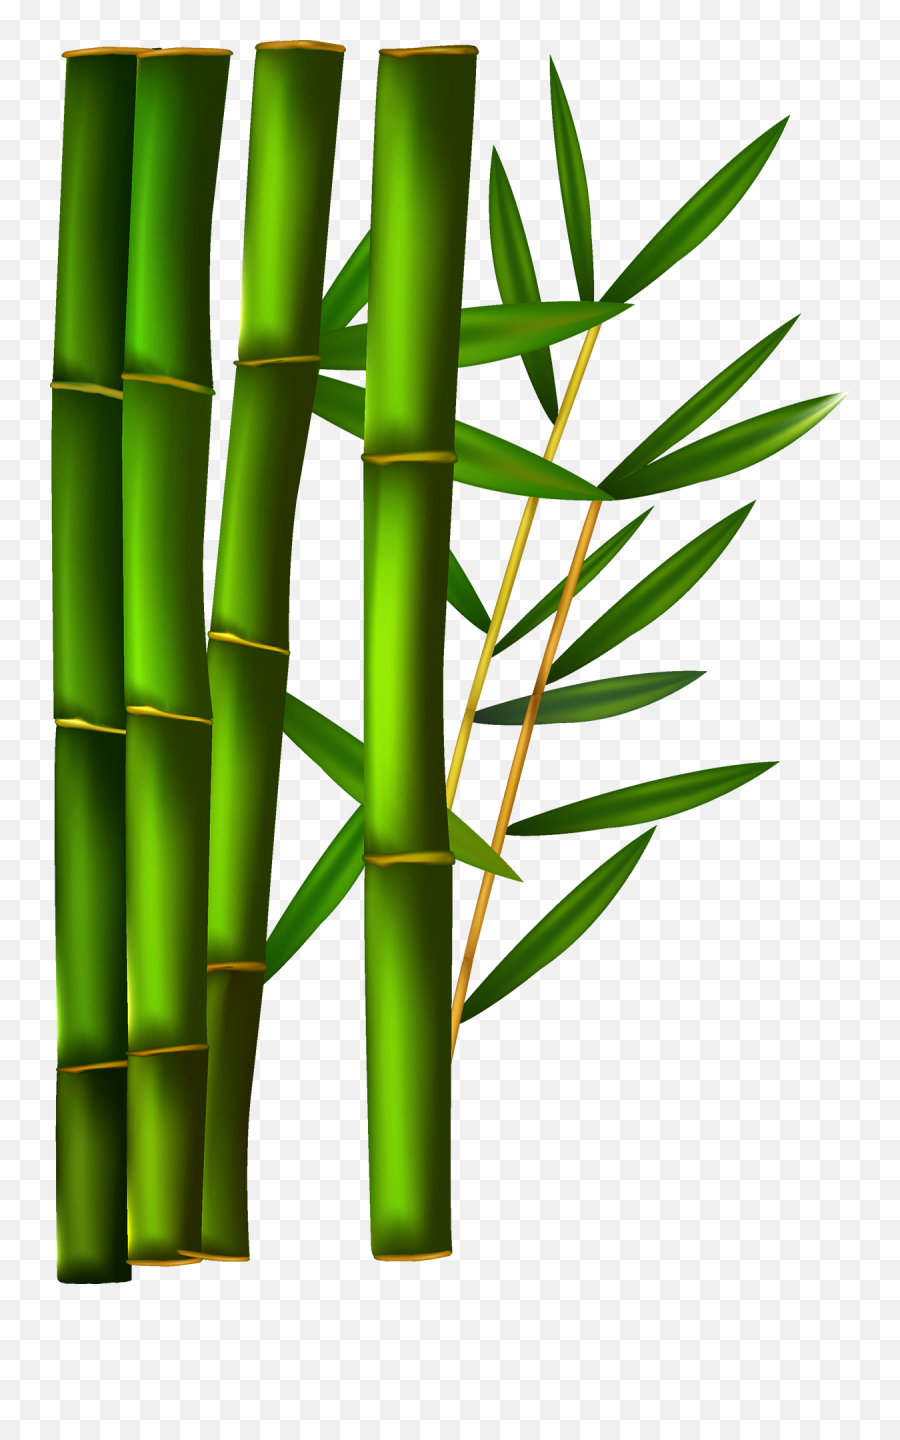 Bamboo Leaves Png Images - Bamboo Clipart Png,Bamboo Leaves Png